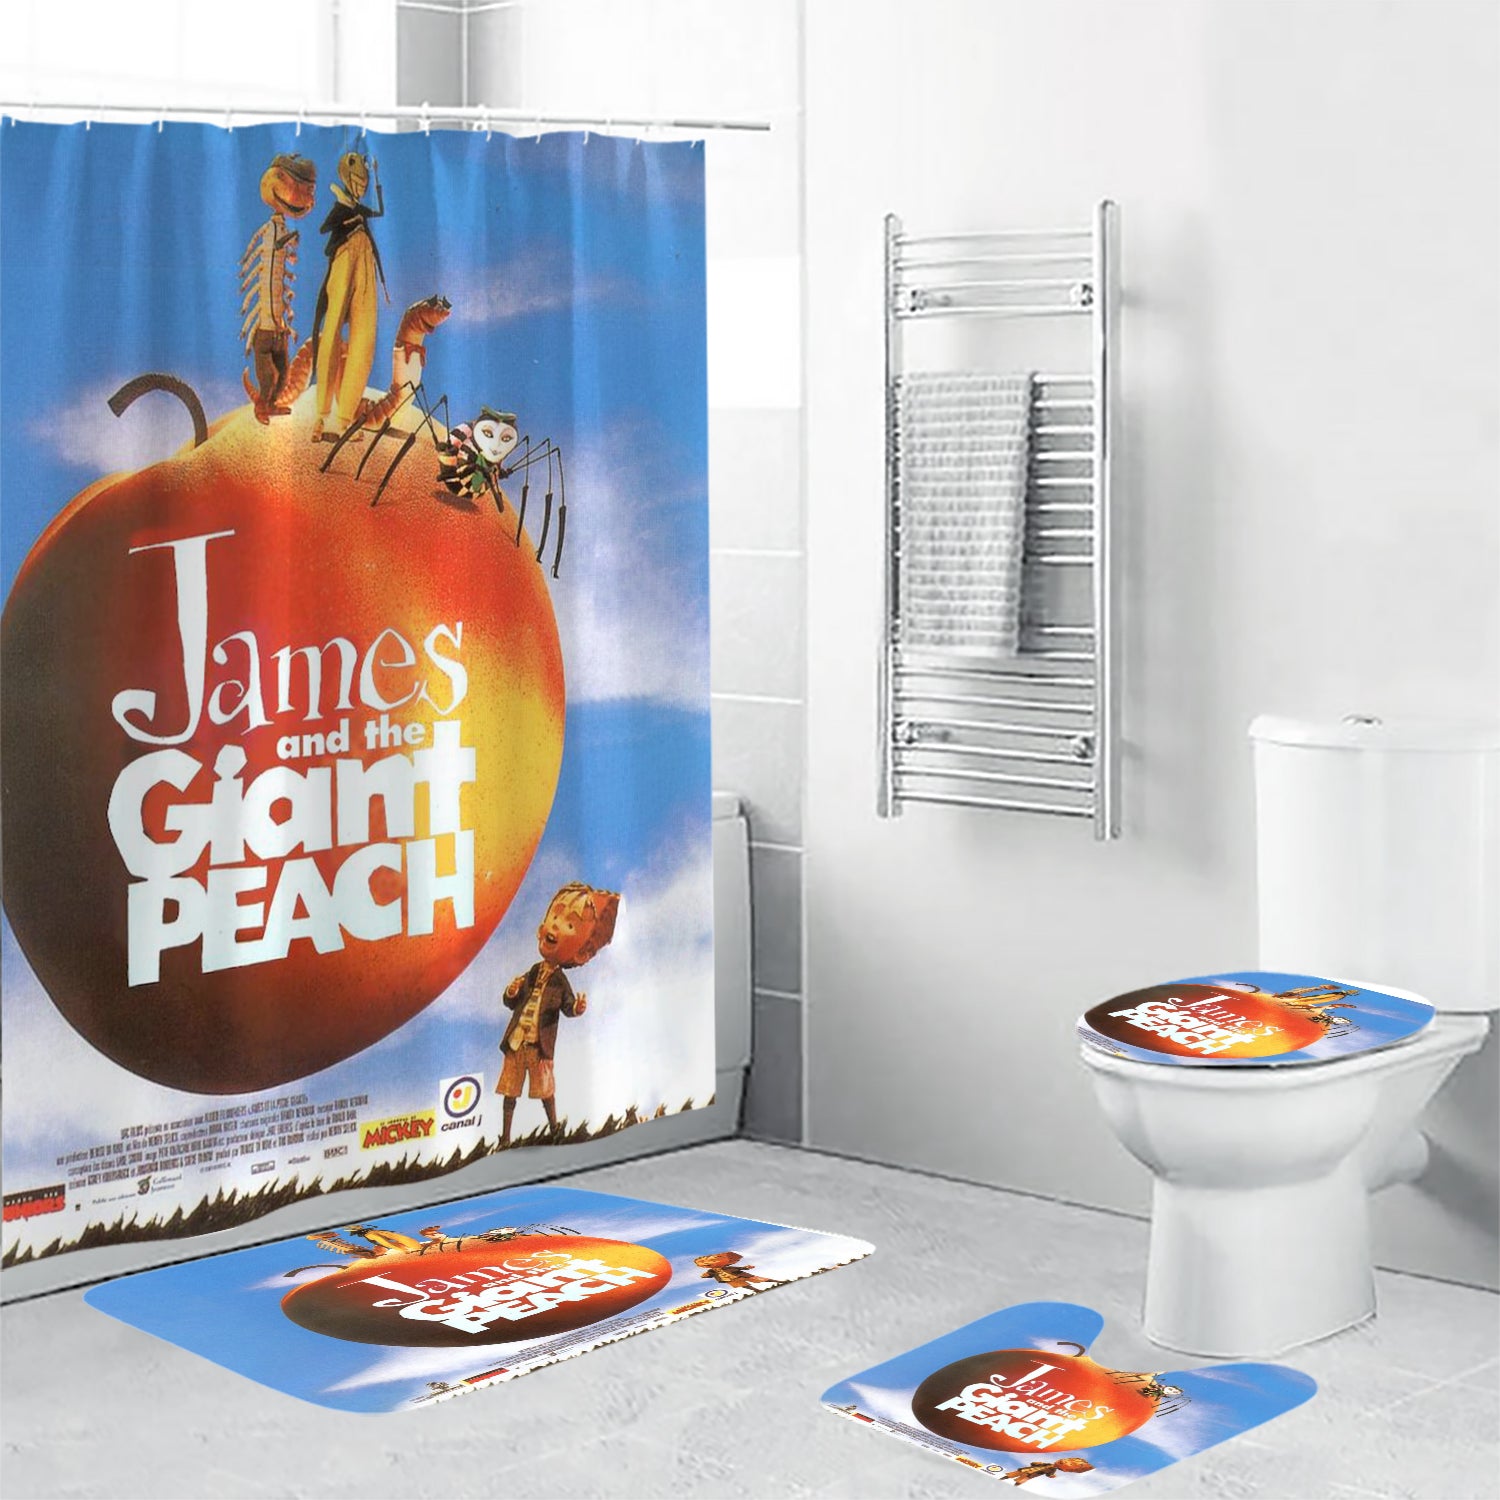 James and the Giant Peach Poster 2 4PCS Shower Curtain Non-Slip Toilet Lid Cover Bath Mat - Bathroom Set Fans Gifts